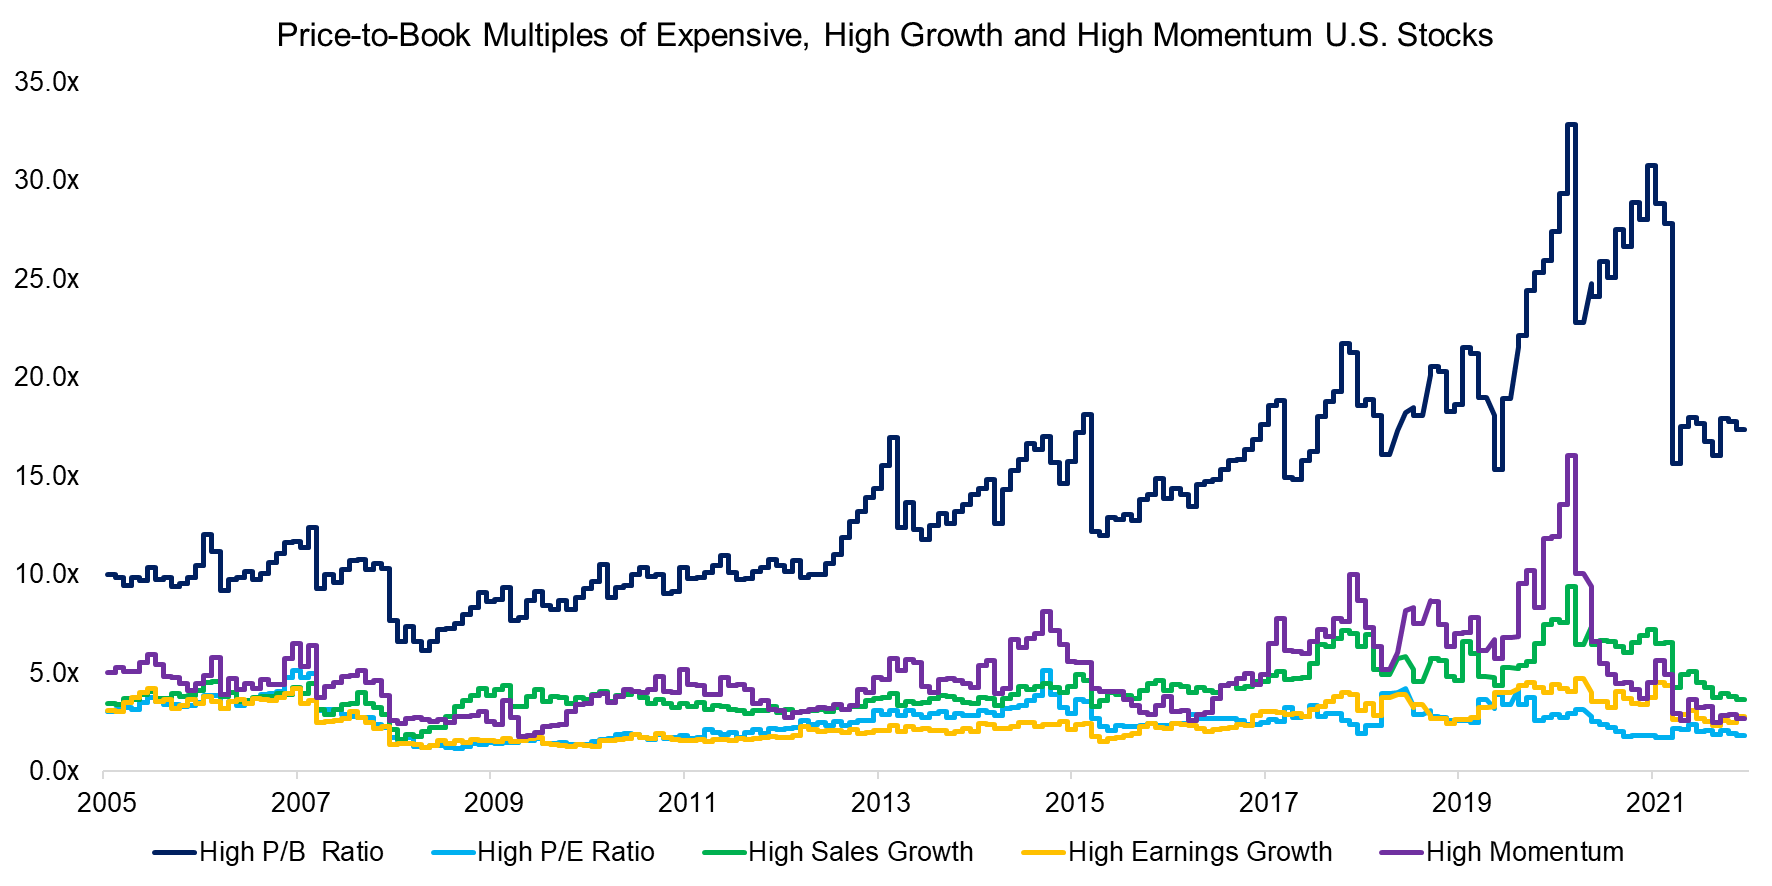 Price-to-Book Multiples of Expensive, High Growth and High Momentum U.S. Stocks